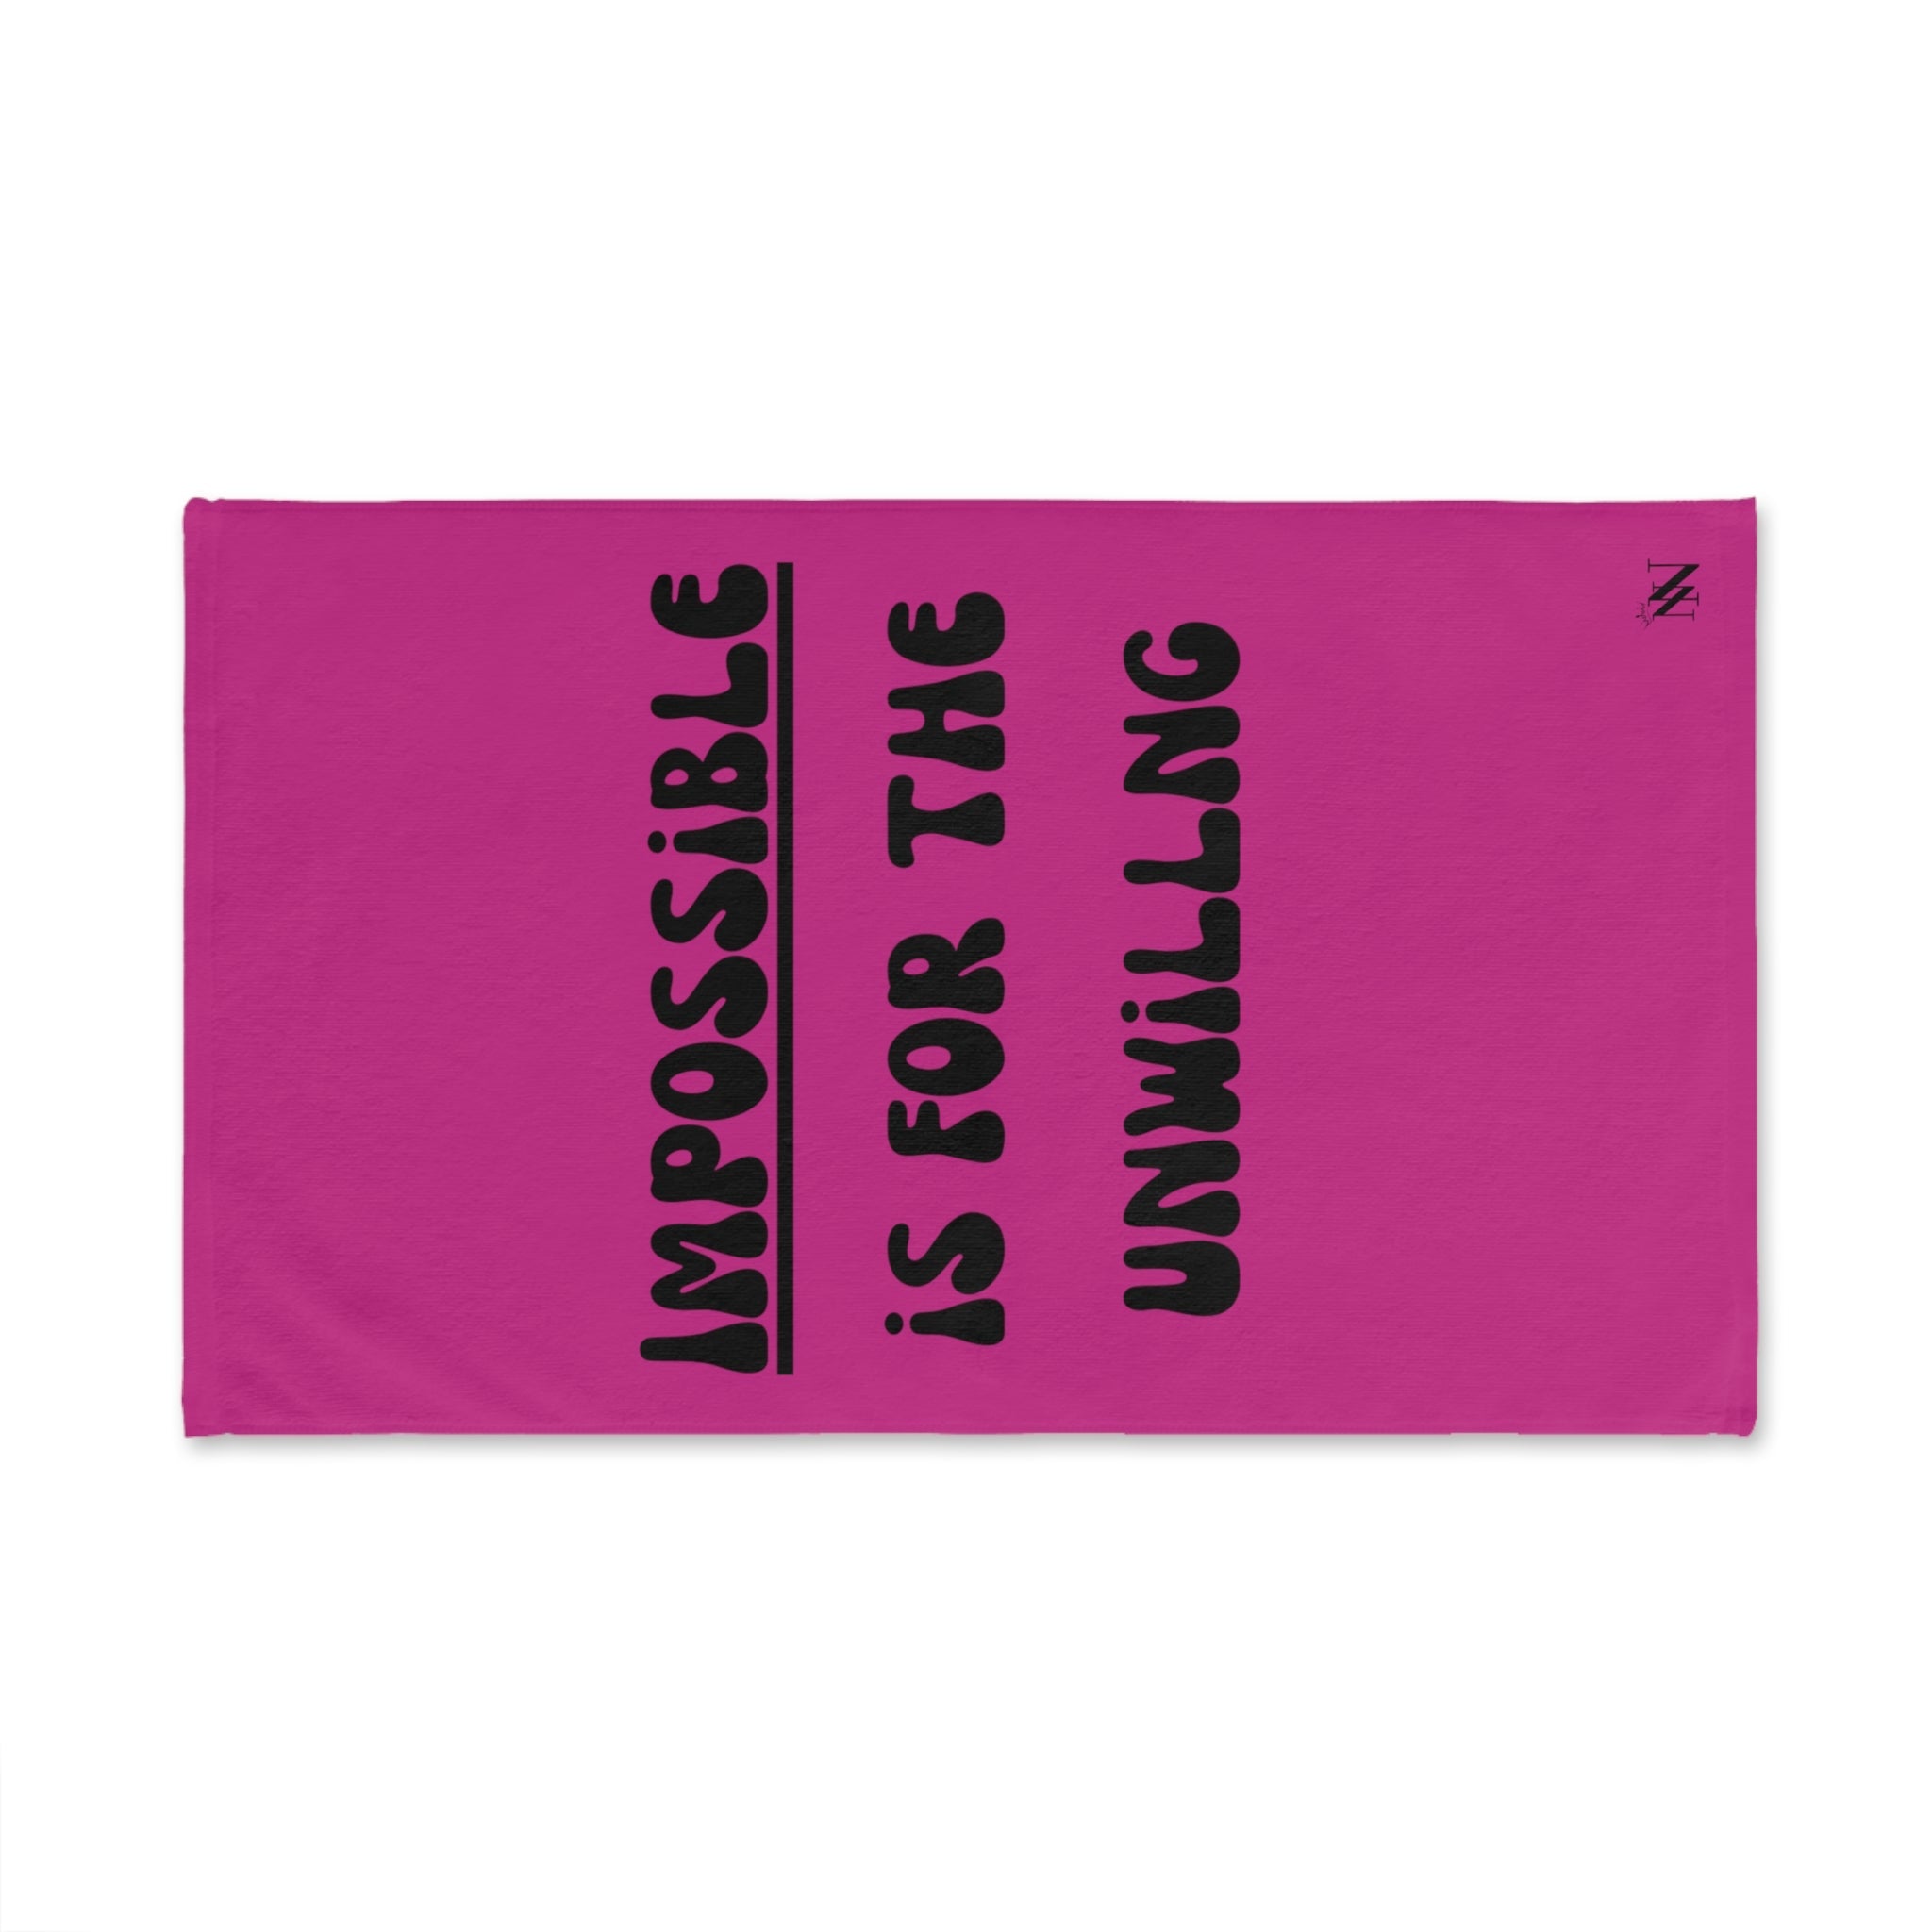 Impossible TryFuscia | Funny Gifts for Men - Gifts for Him - Birthday Gifts for Men, Him, Husband, Boyfriend, New Couple Gifts, Fathers & Valentines Day Gifts, Hand Towels NECTAR NAPKINS